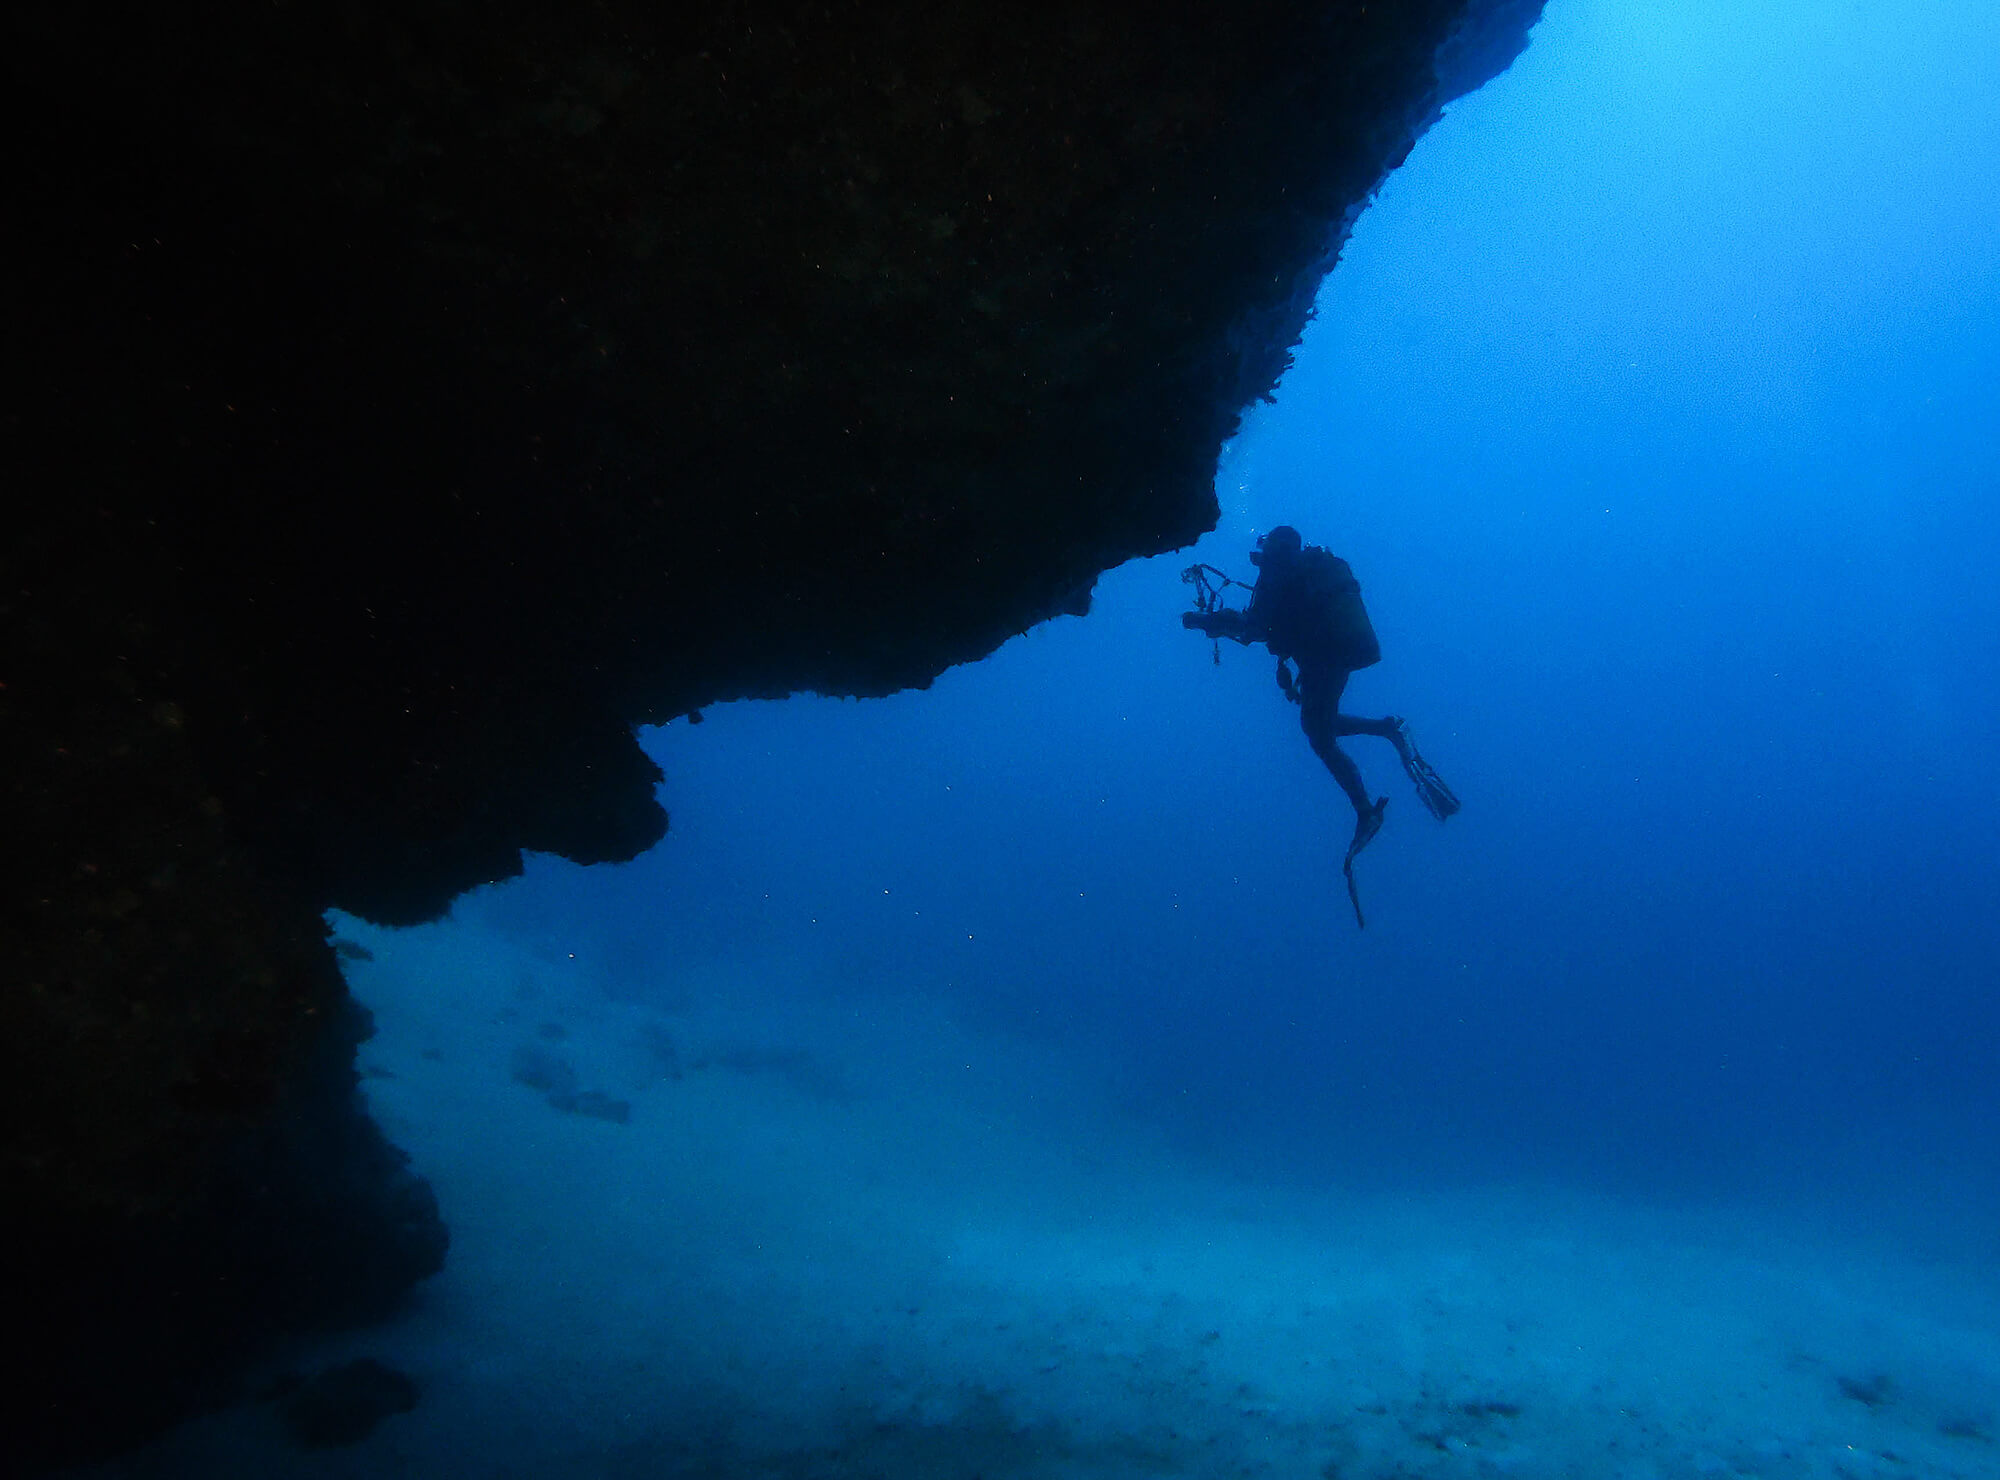 Ali Scuba Diving Silhouette Coming Out Of A Cave On Lanzarote, Canary Island, Spain